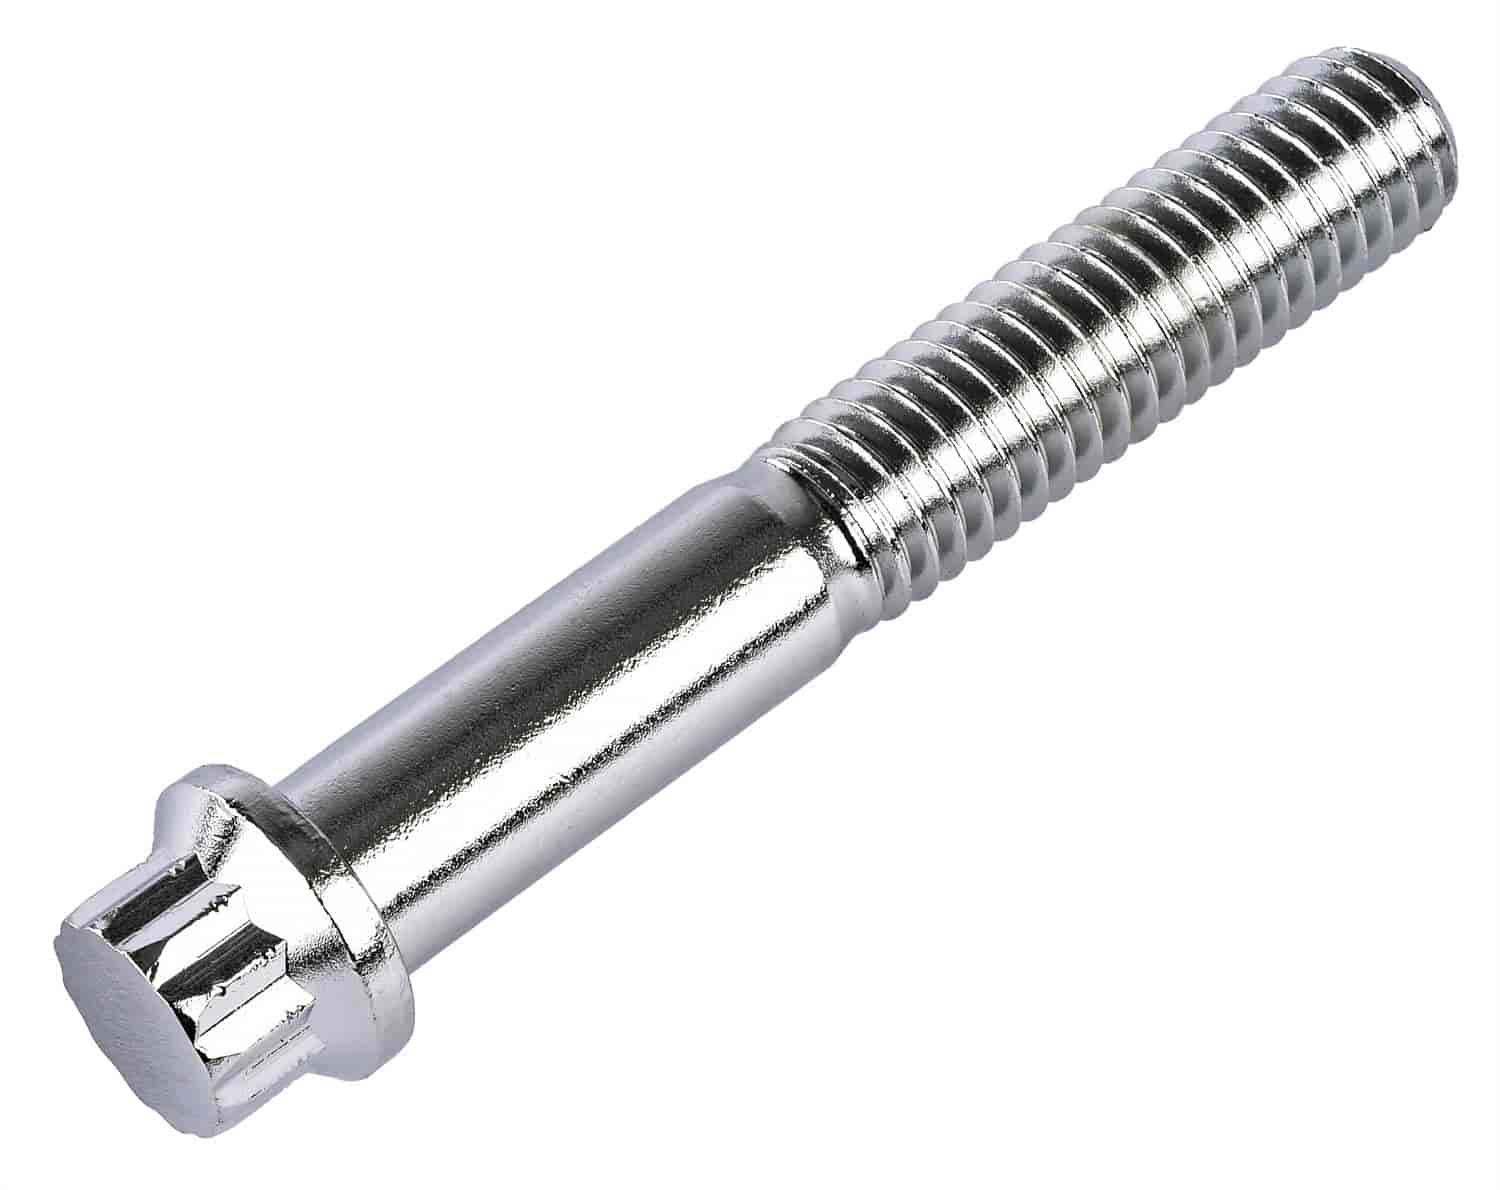 12-Point Fastener [3/8 in. -16 Thread x 2 1/2 (.500) in. Length]